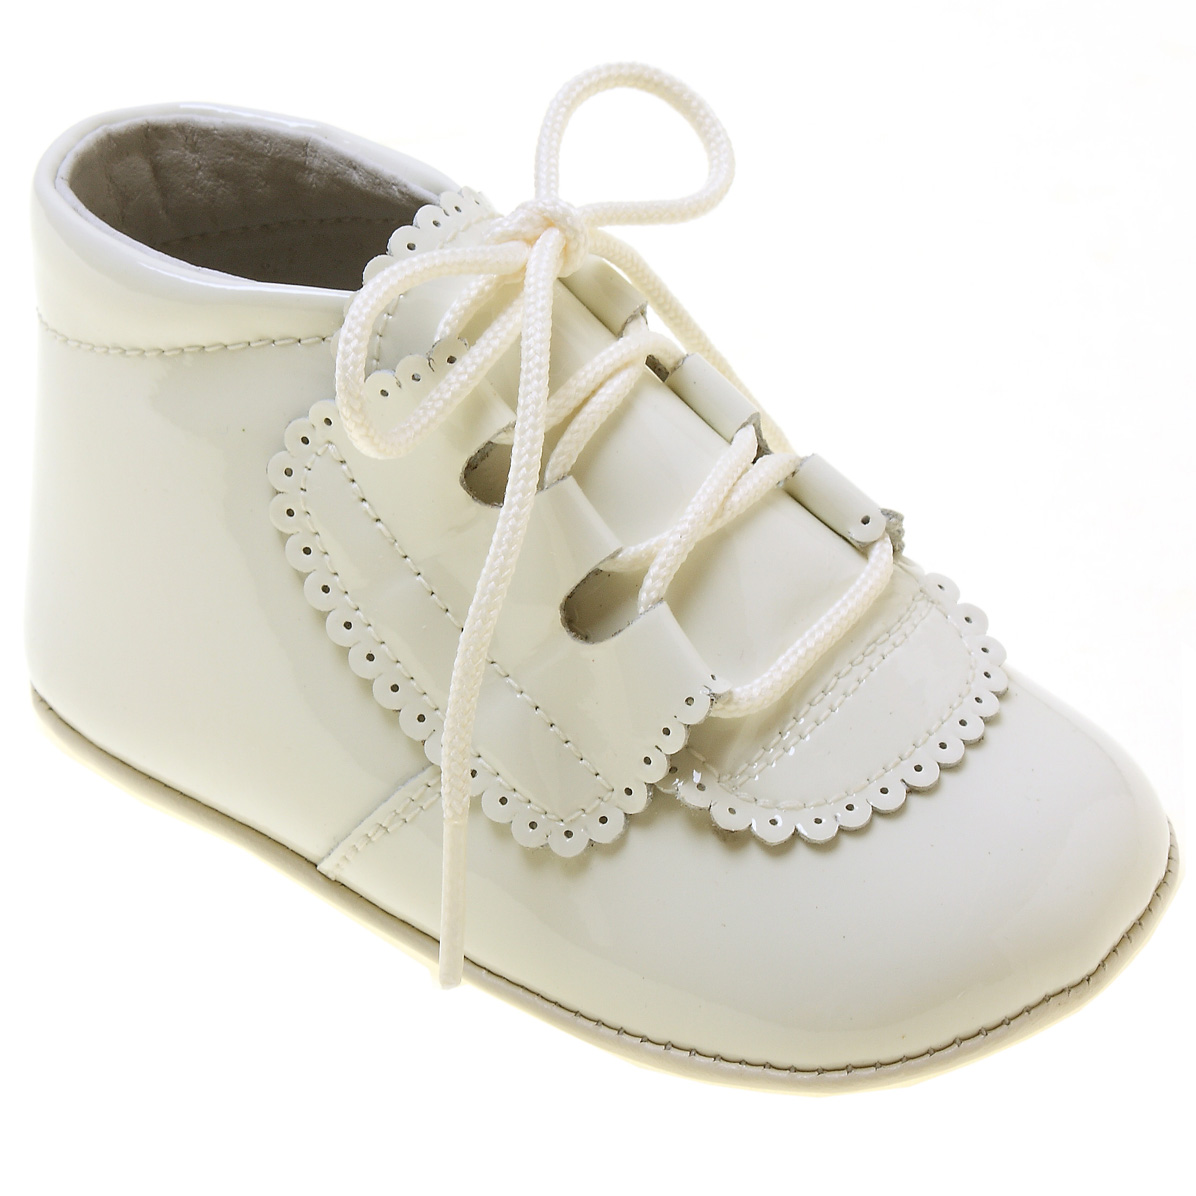 BABY GIRLS CHRISTENING SHOES WHITE WEDDING SPECIAL OCCASION PATENT PRAM SHOES